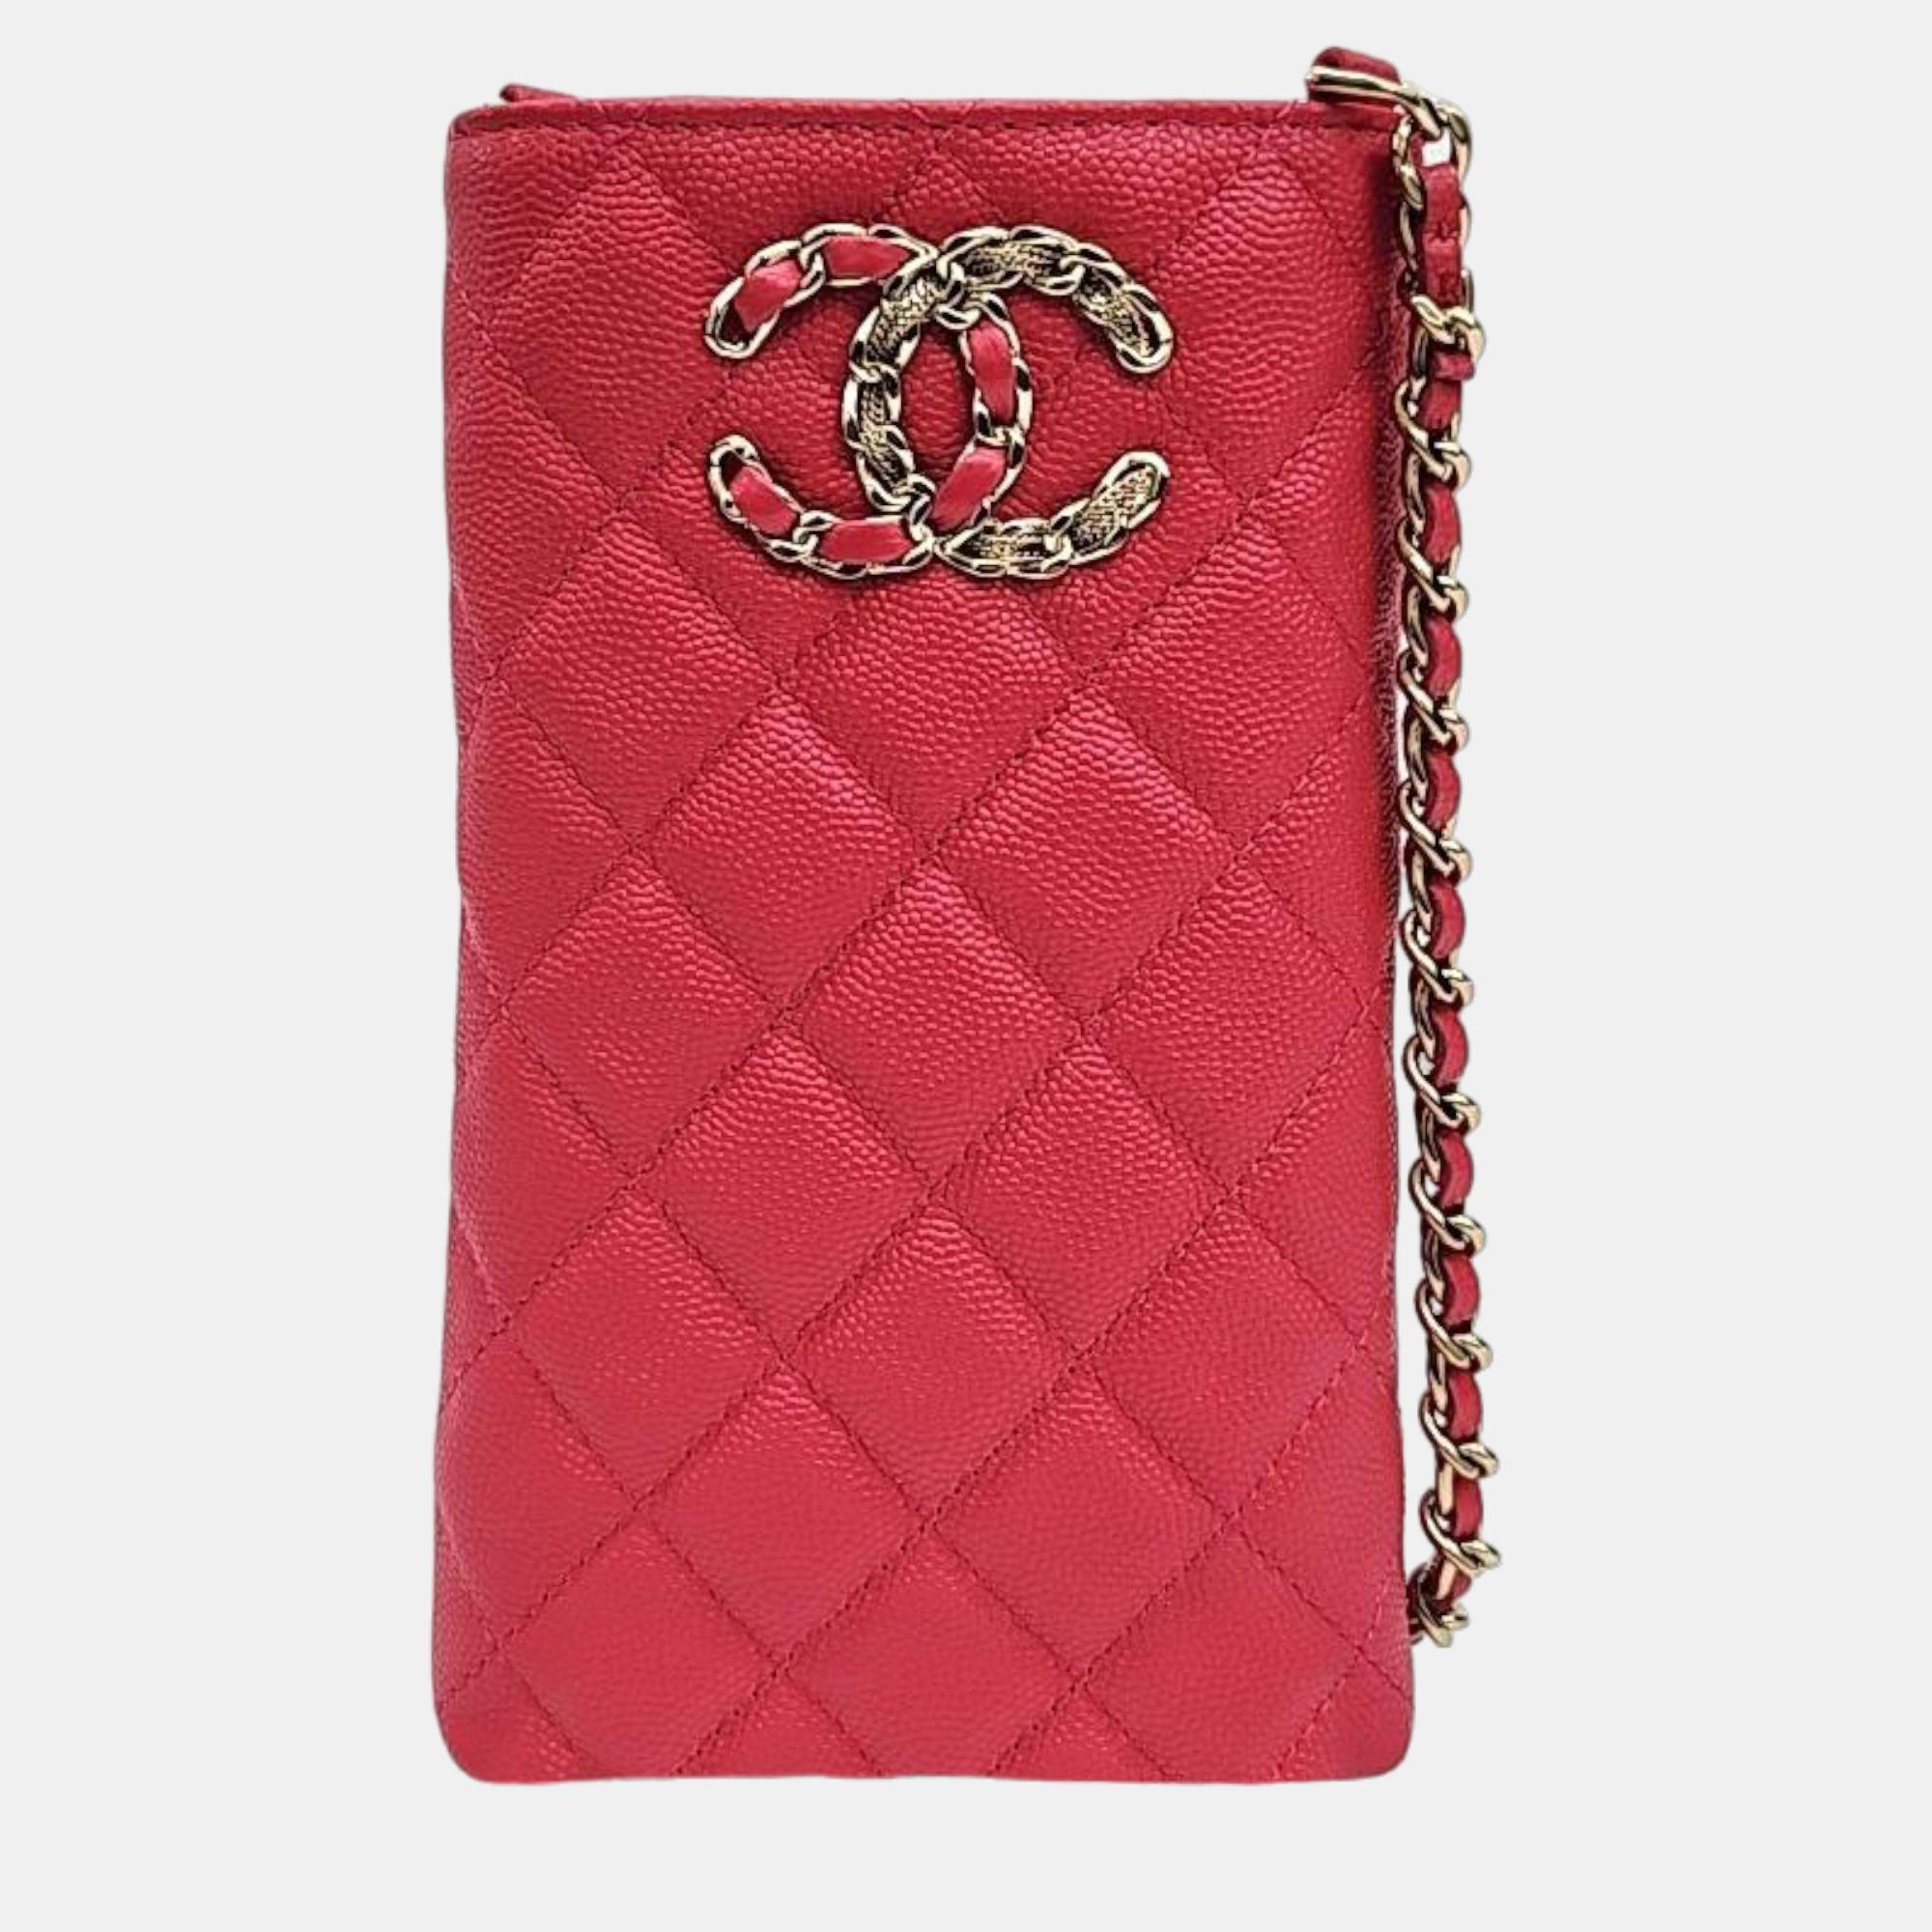 Chanel Red Quilted Leather 19 Phone Holder Crossbody Bag